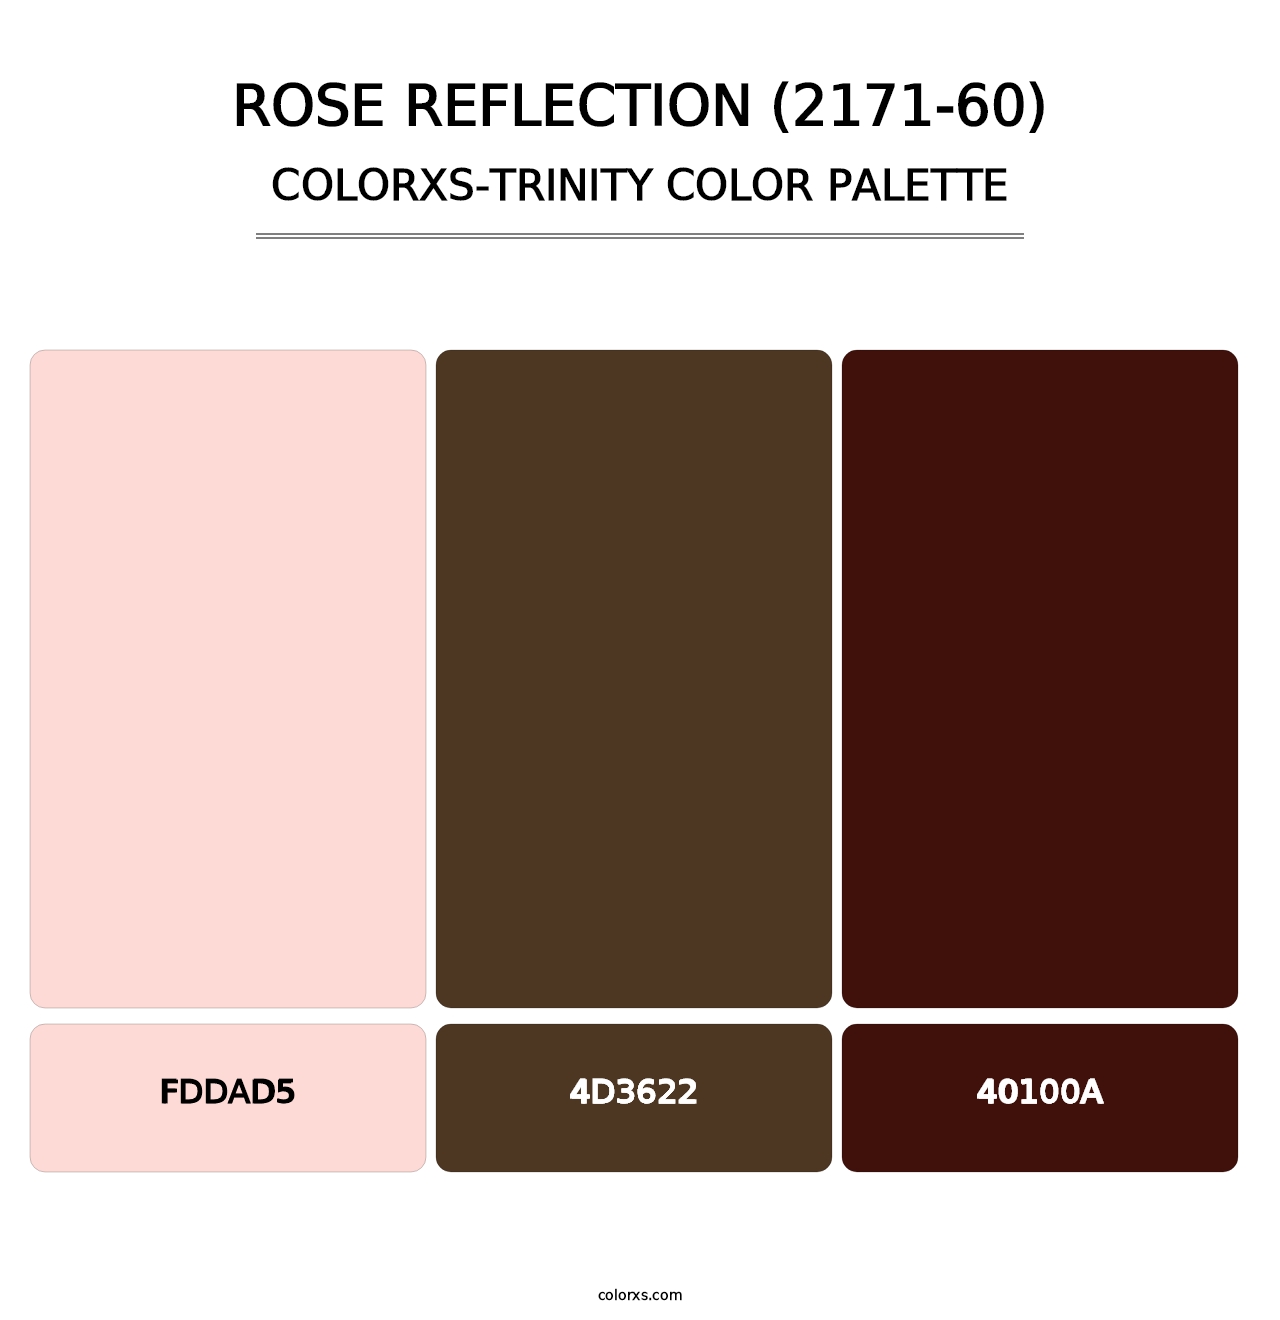 Rose Reflection (2171-60) - Colorxs Trinity Palette